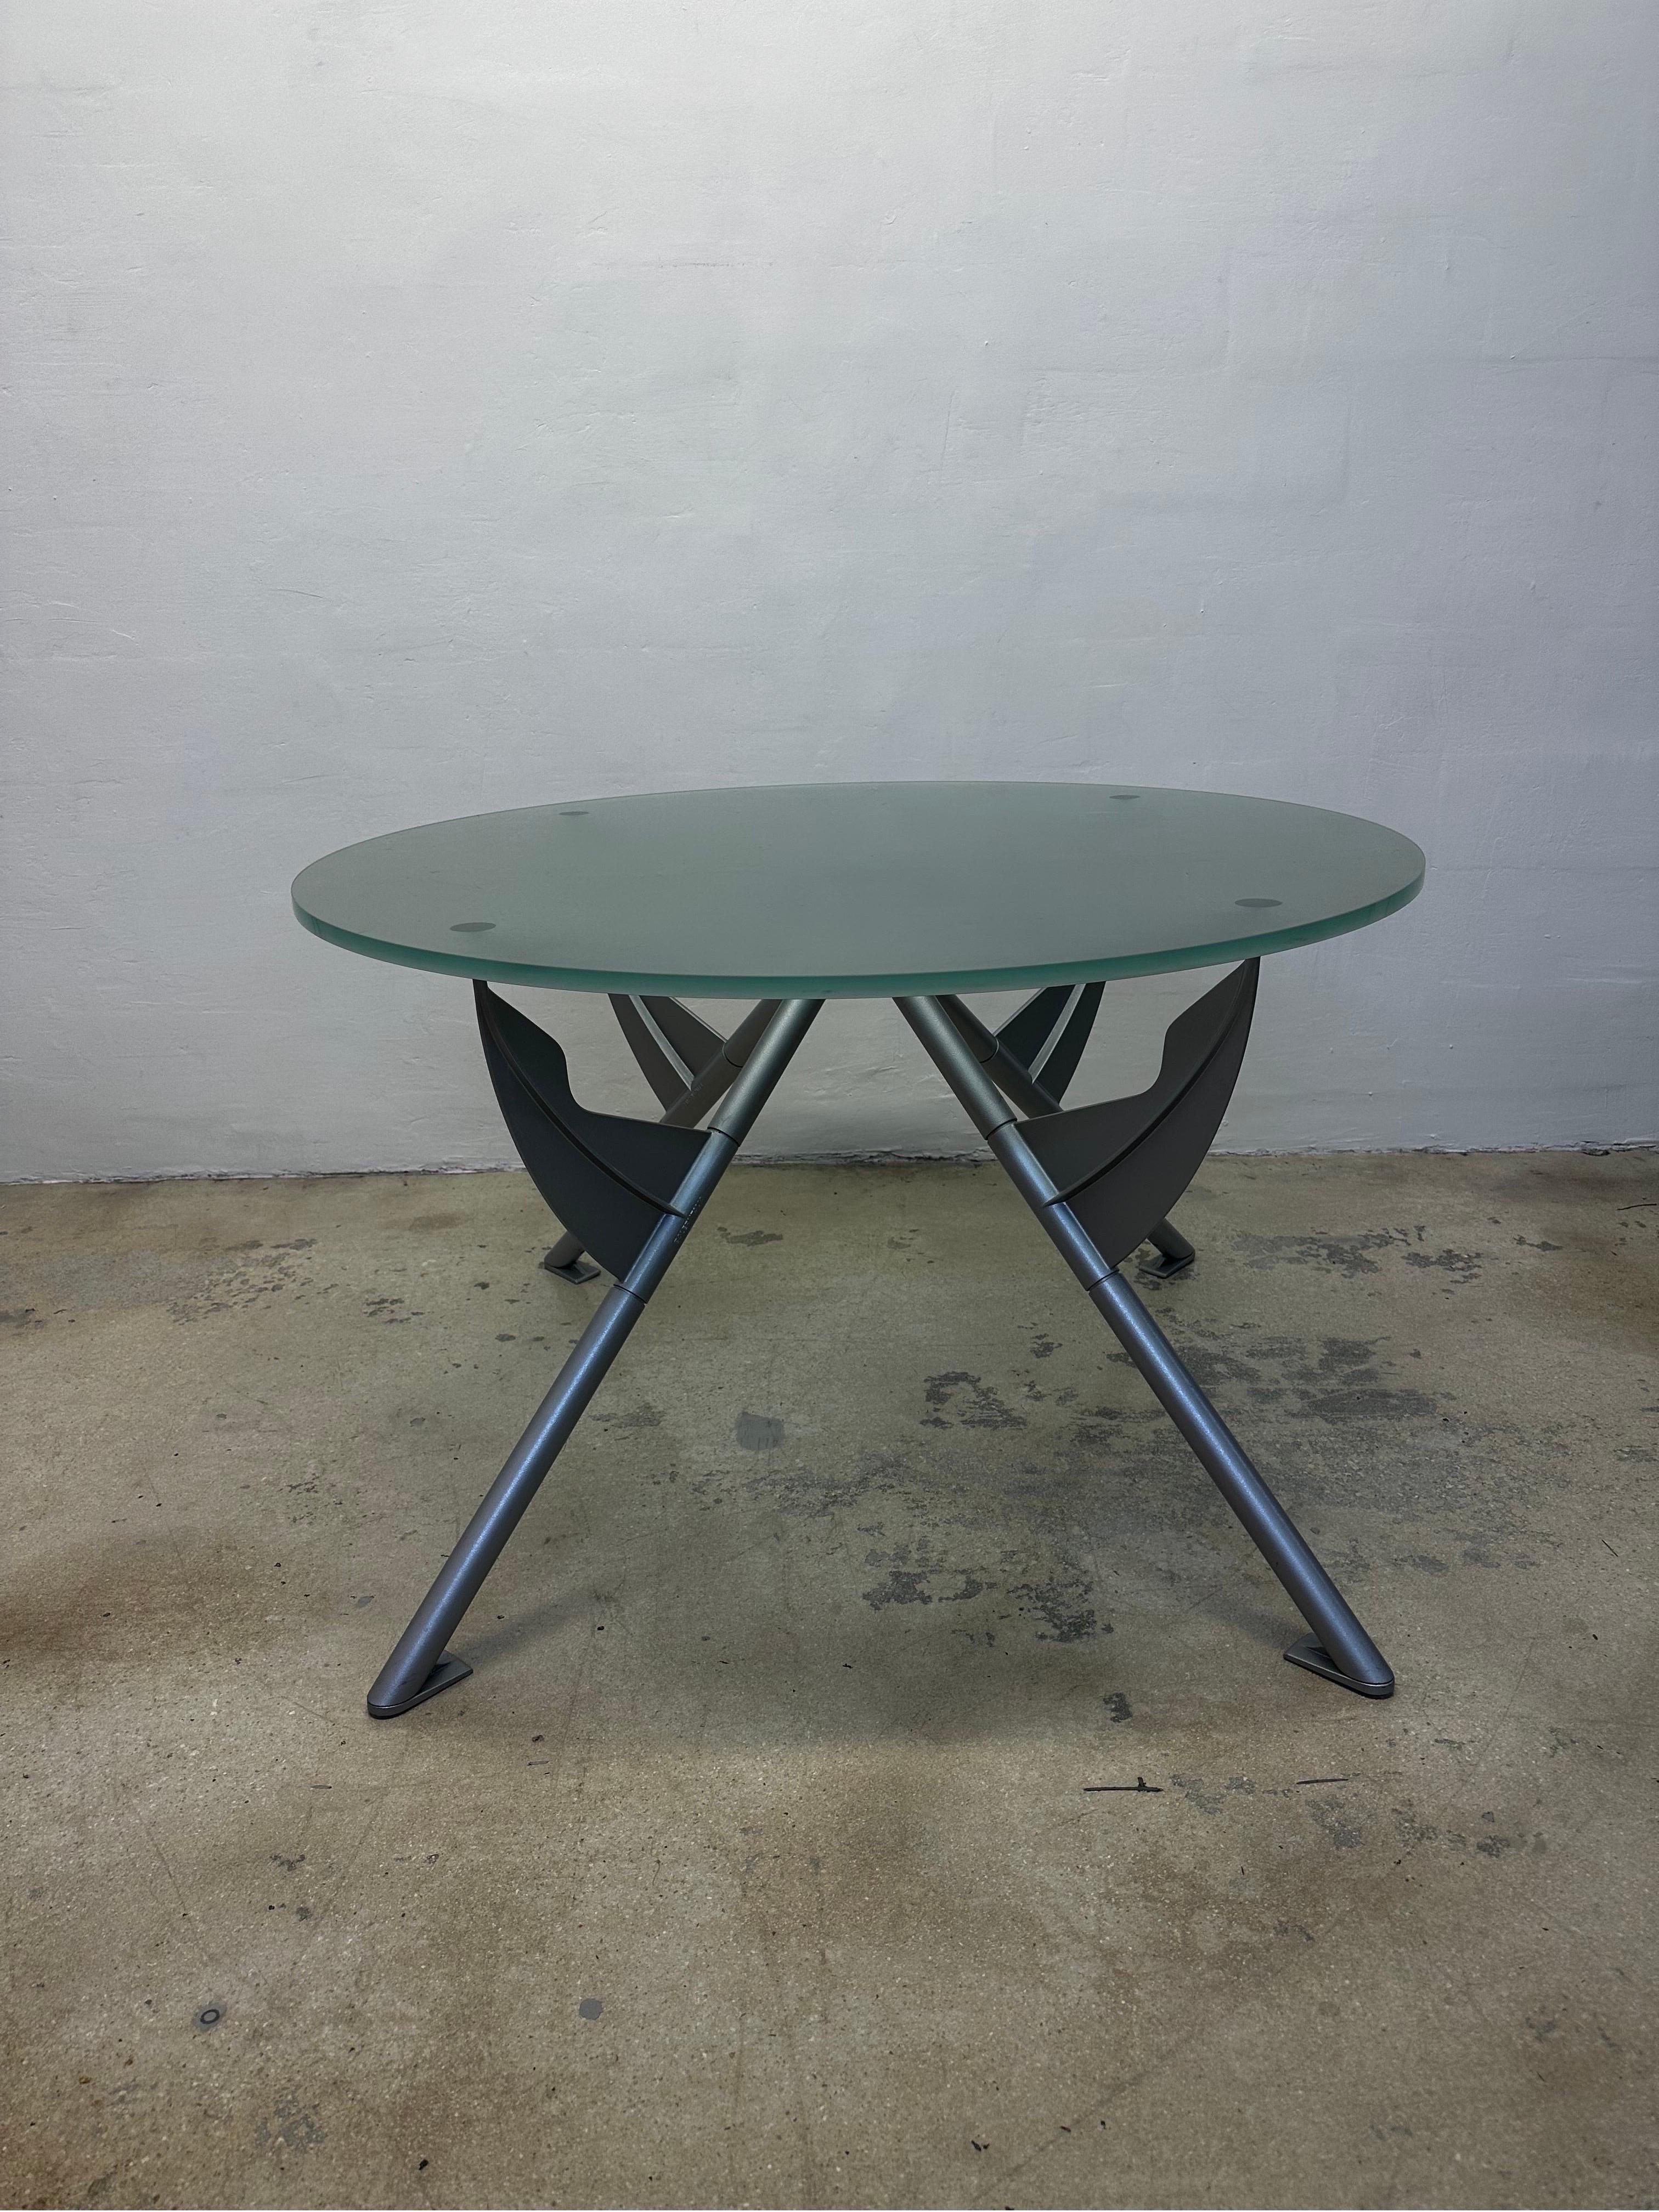 President M dining or center table with sandblasted seafoam green glass top on a gray enameled steel base by Philippe Starck for Baleri Italia.